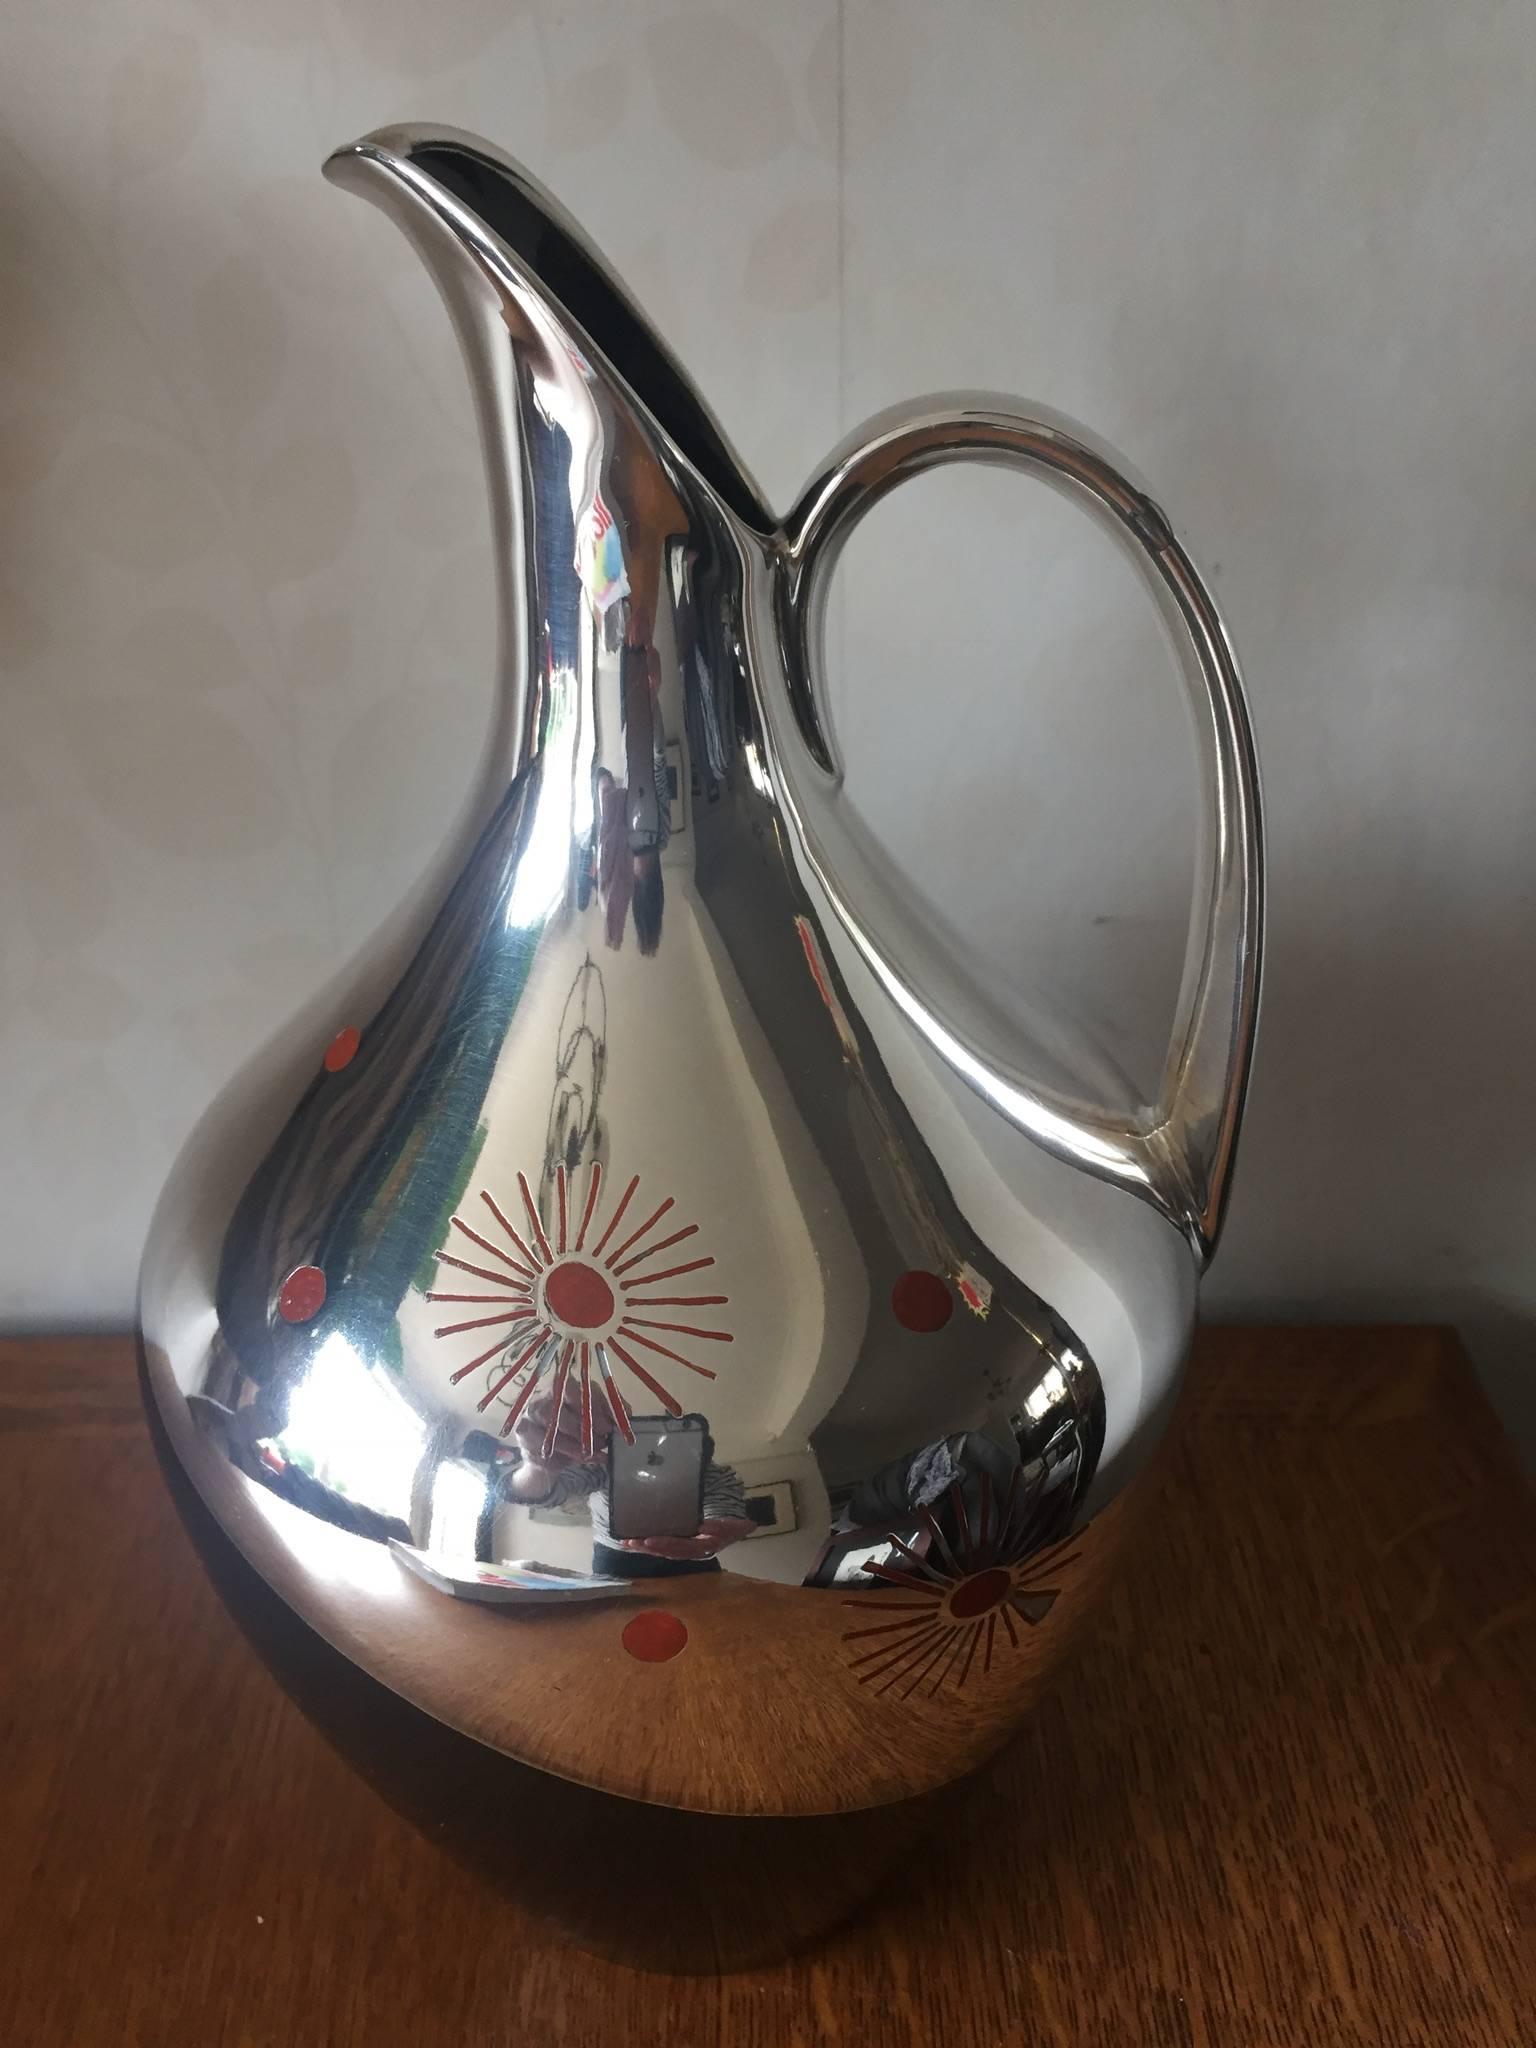 Striking fine quality porcelain jug with silver overlay and red enamel abstract details. The design attributed to Friedrich Spahr. Marks to the handle and base including 1000 for pure silver. Dates to circa 1950. Light wear to one small area